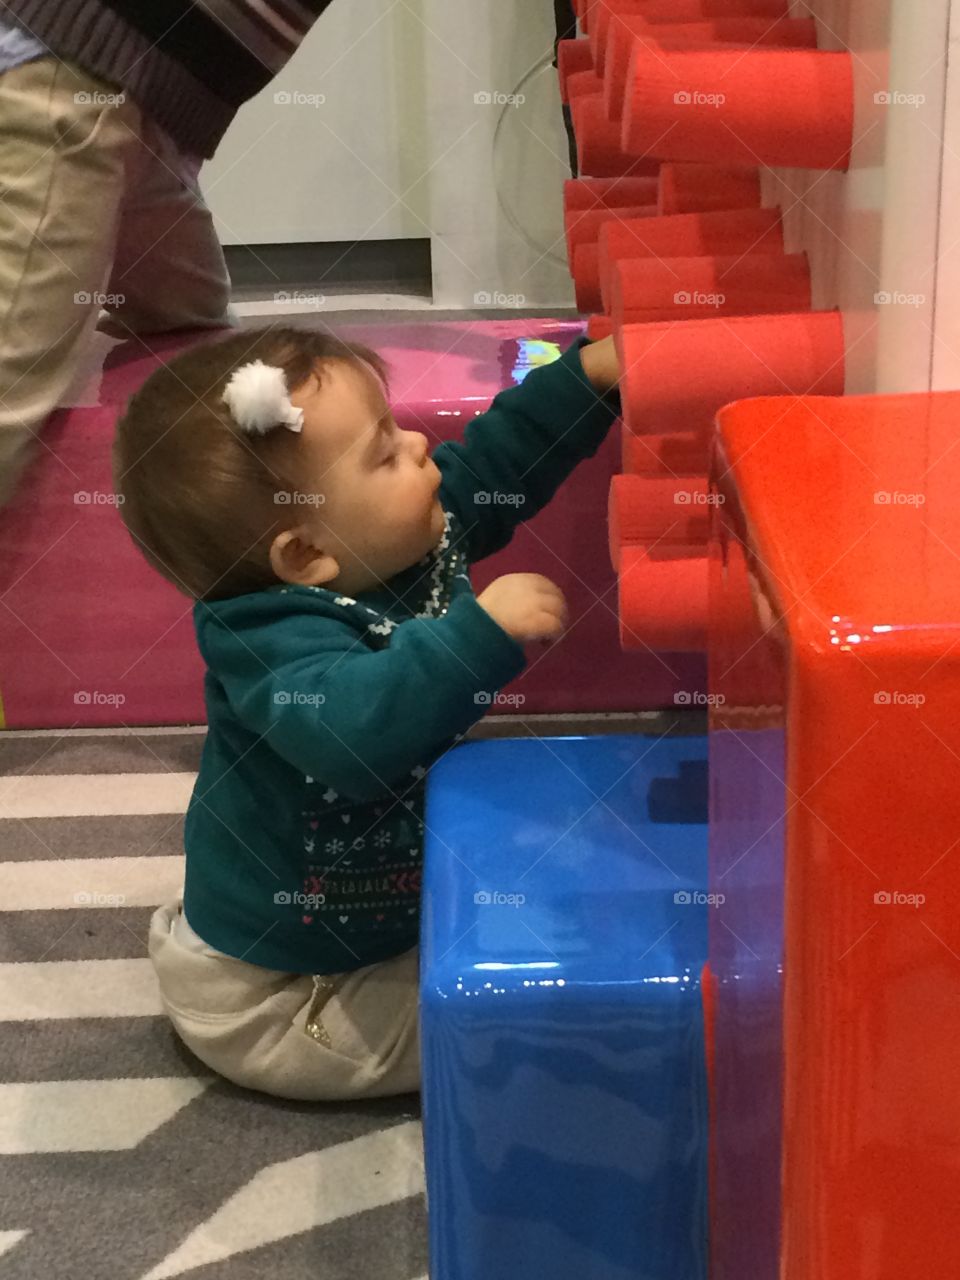 Discovery at indoor playground